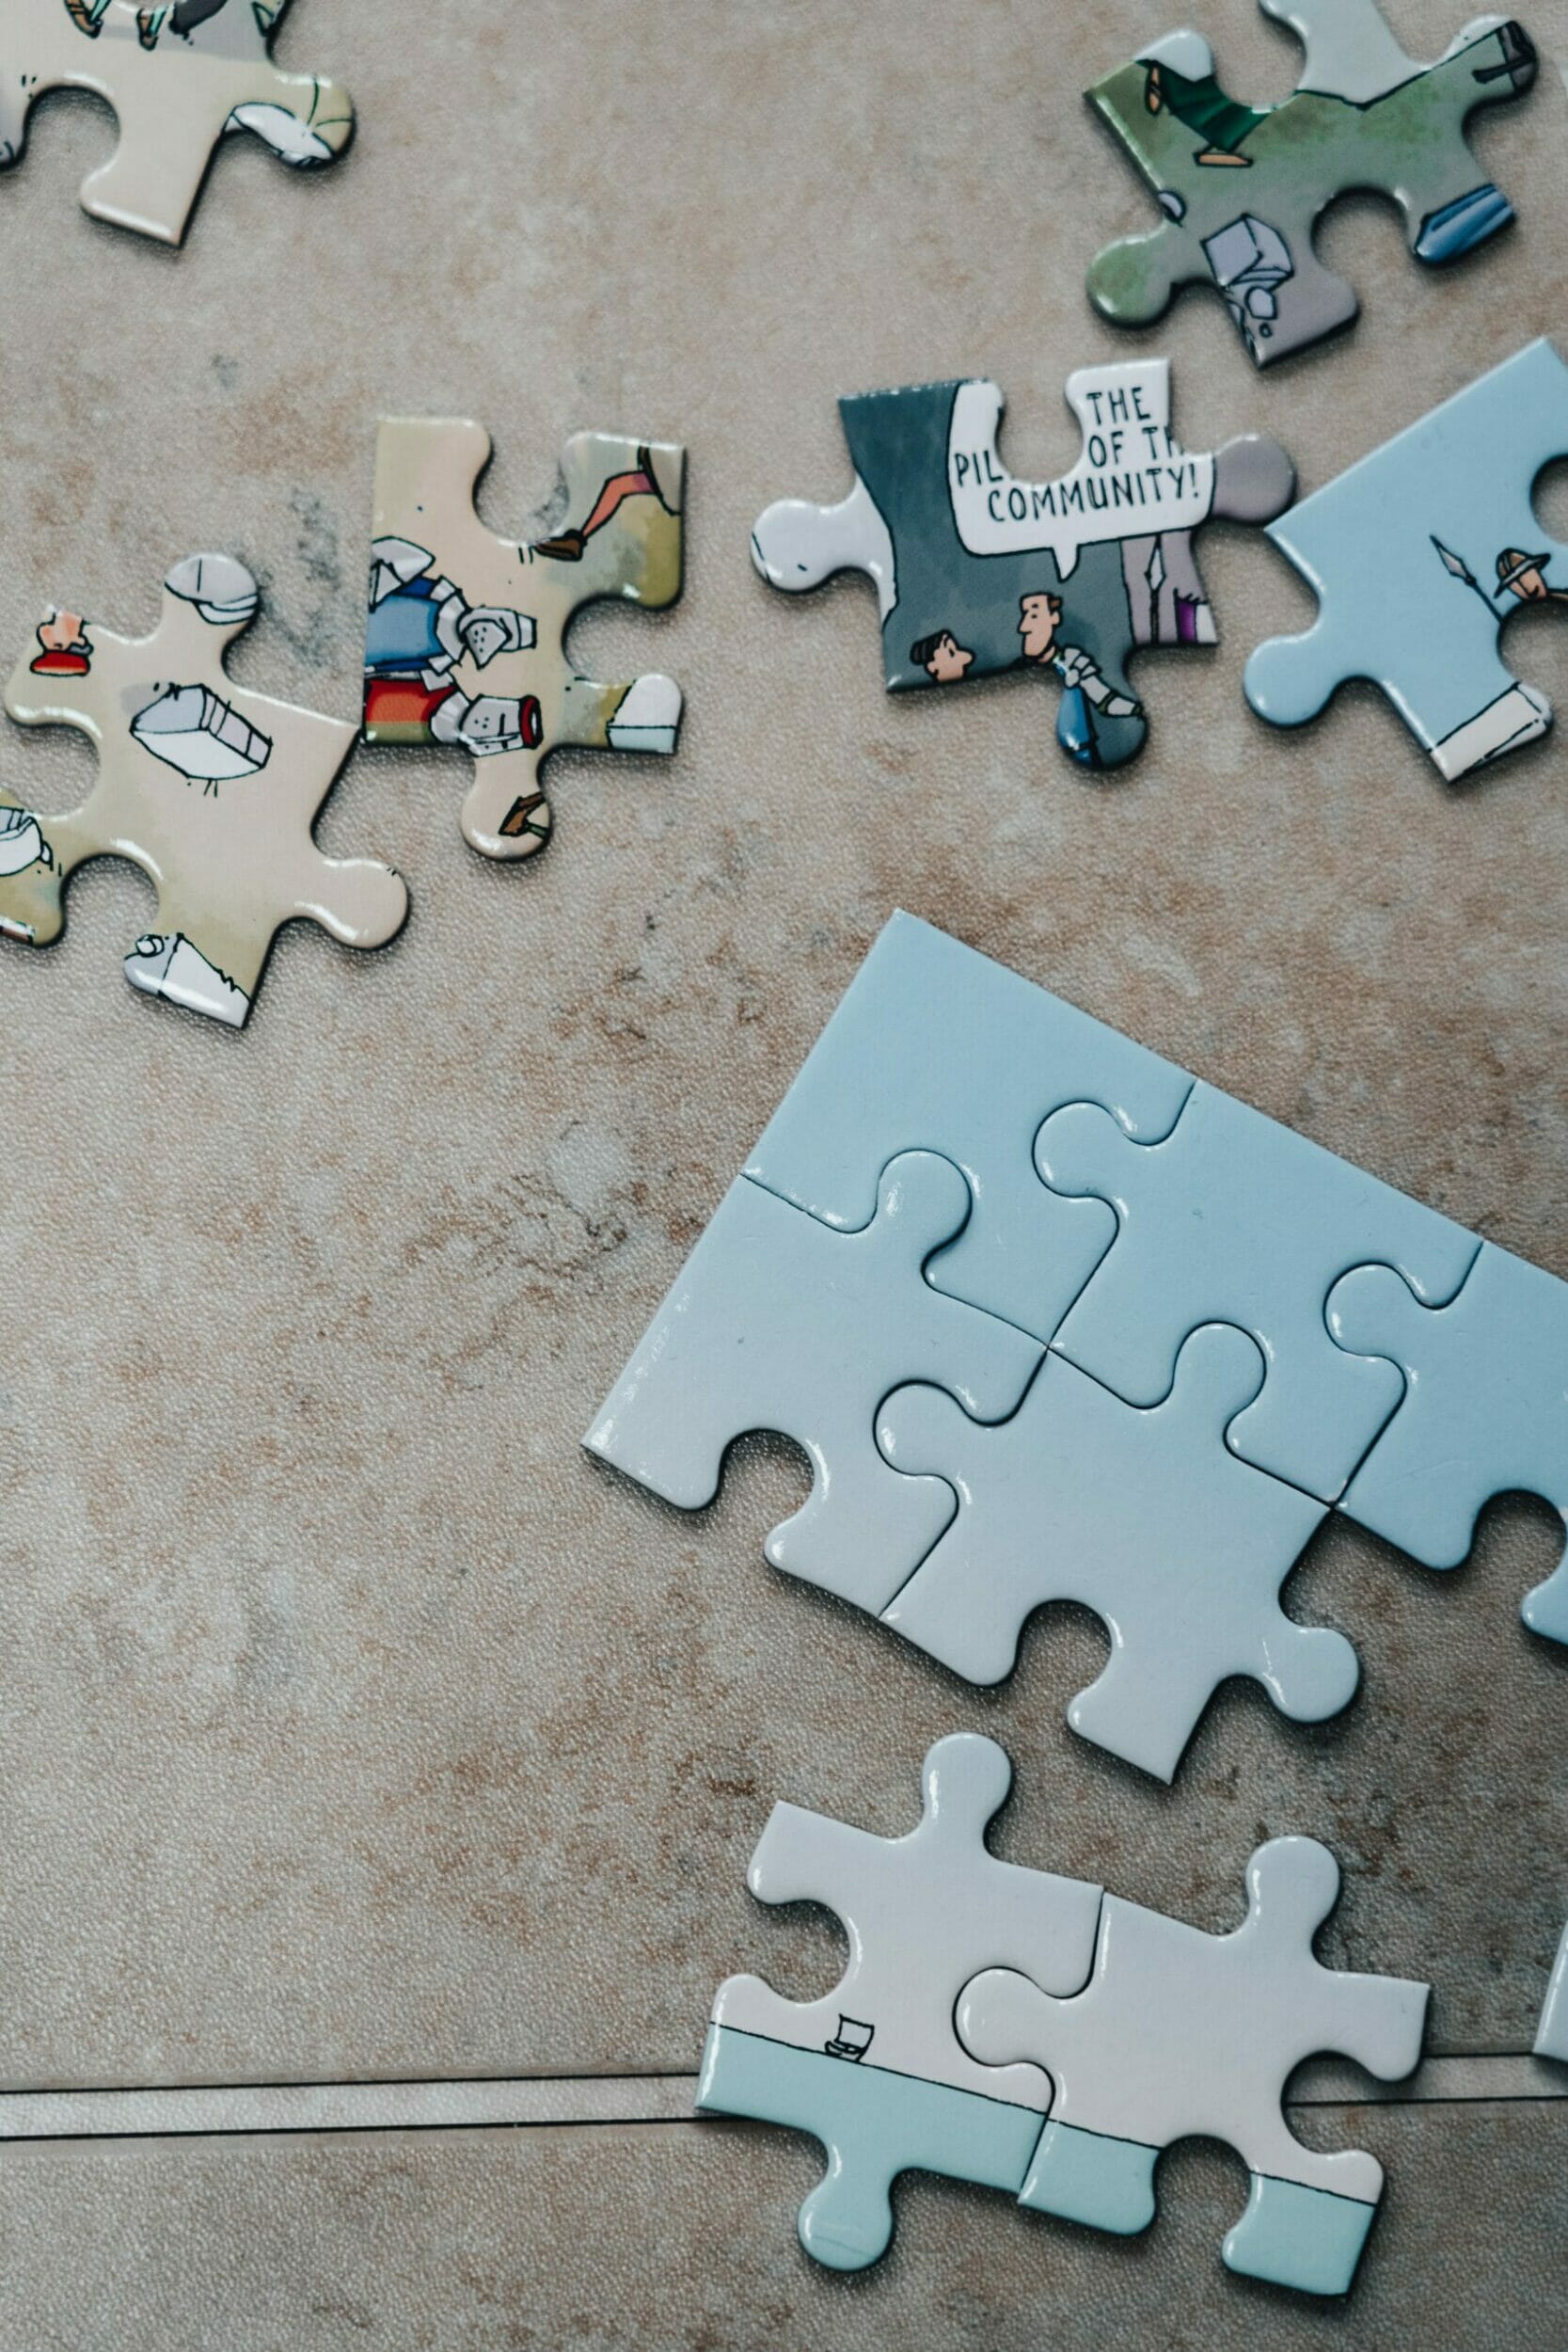 Puzzle pieces - Finding Help in Four Simple Steps